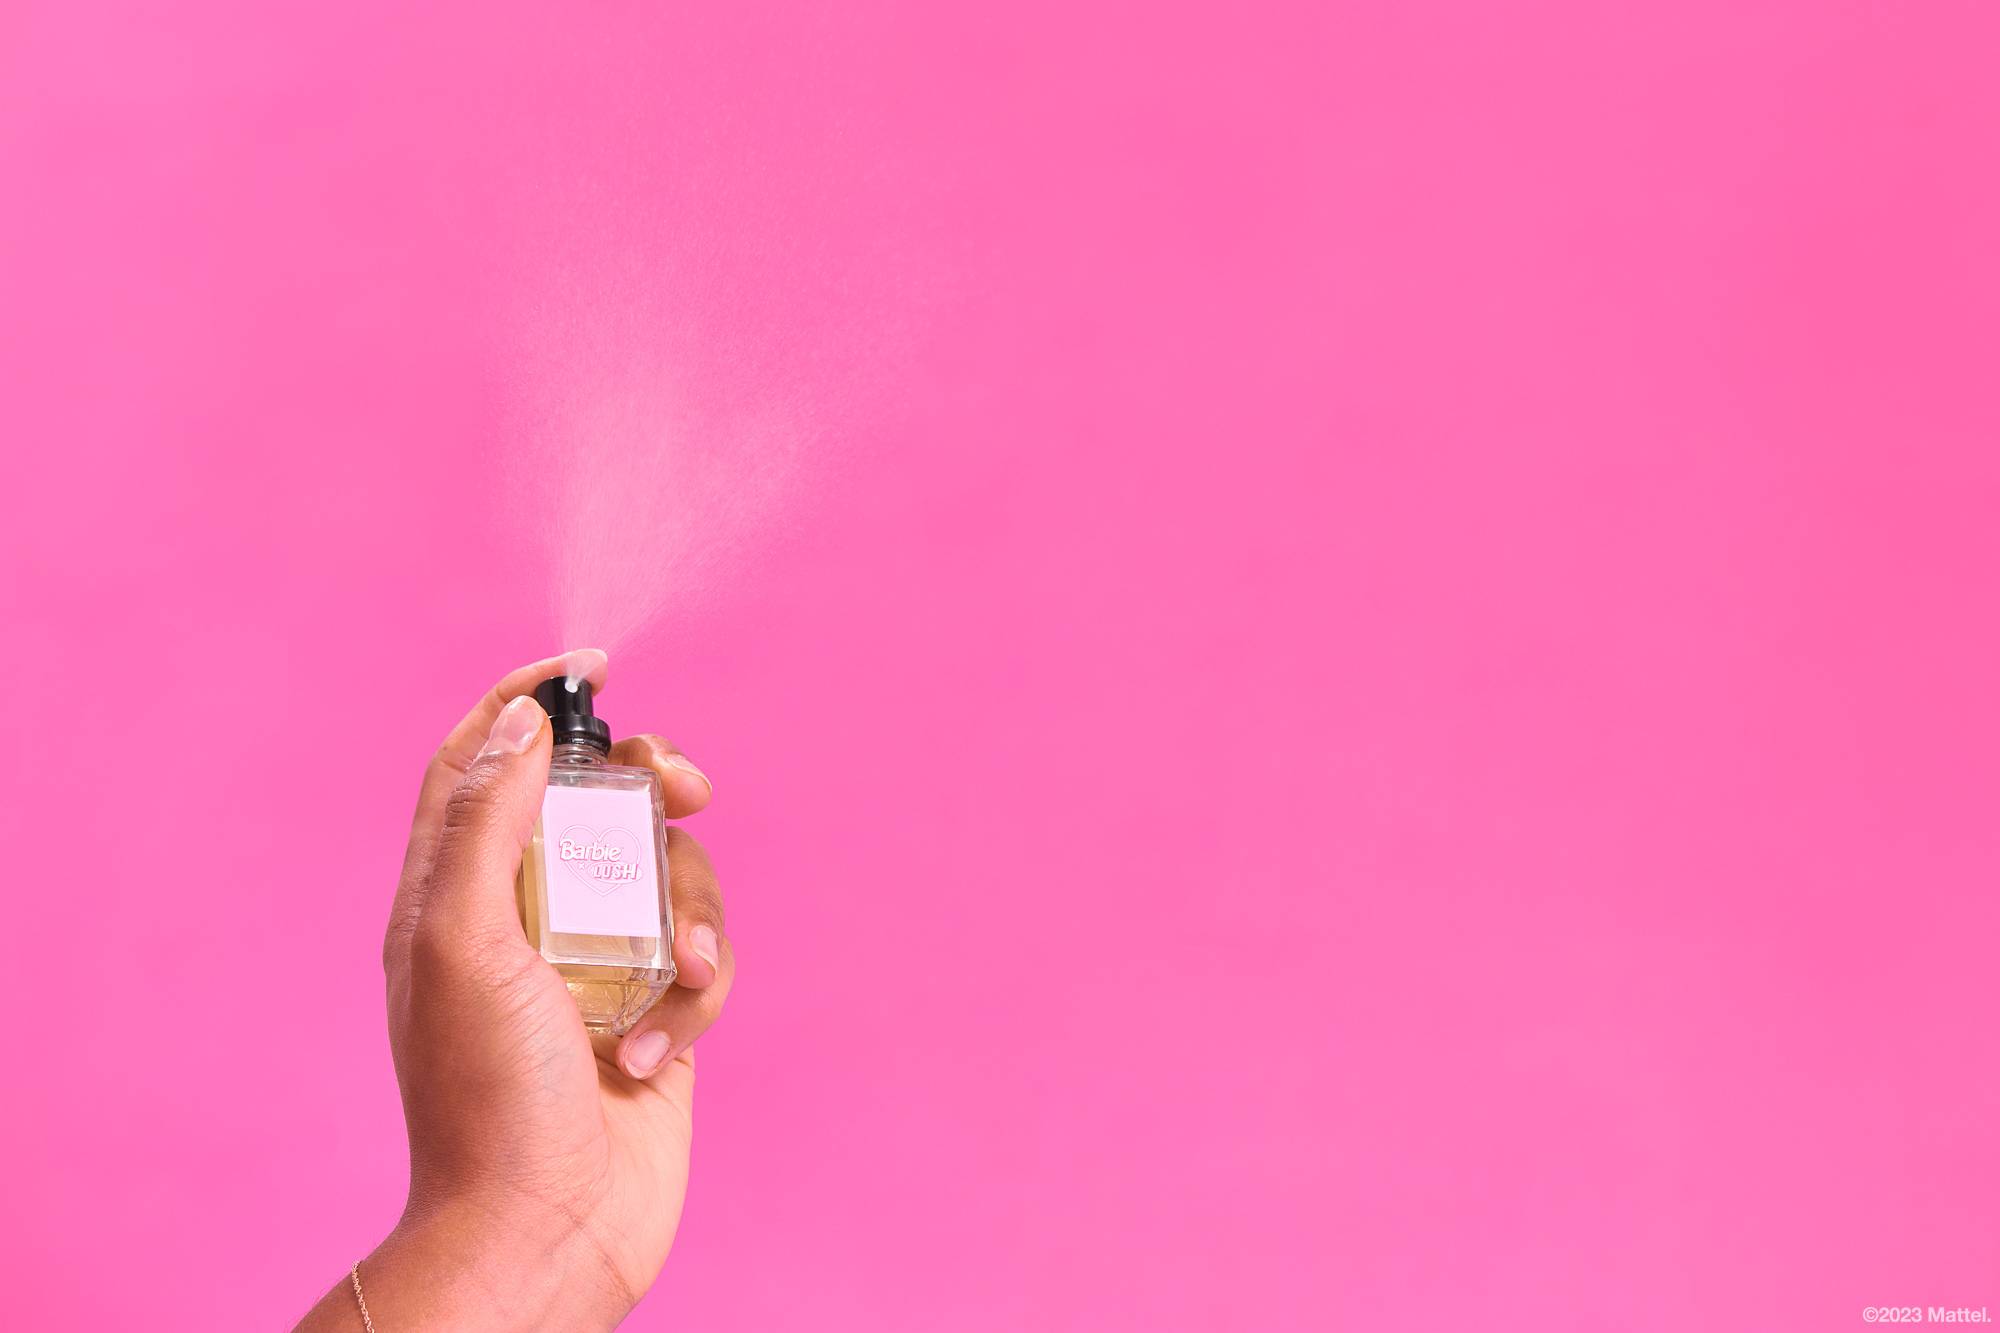 An outstretched arm is holding the perfume bottle and gently spritzing in front of a bright pink background.